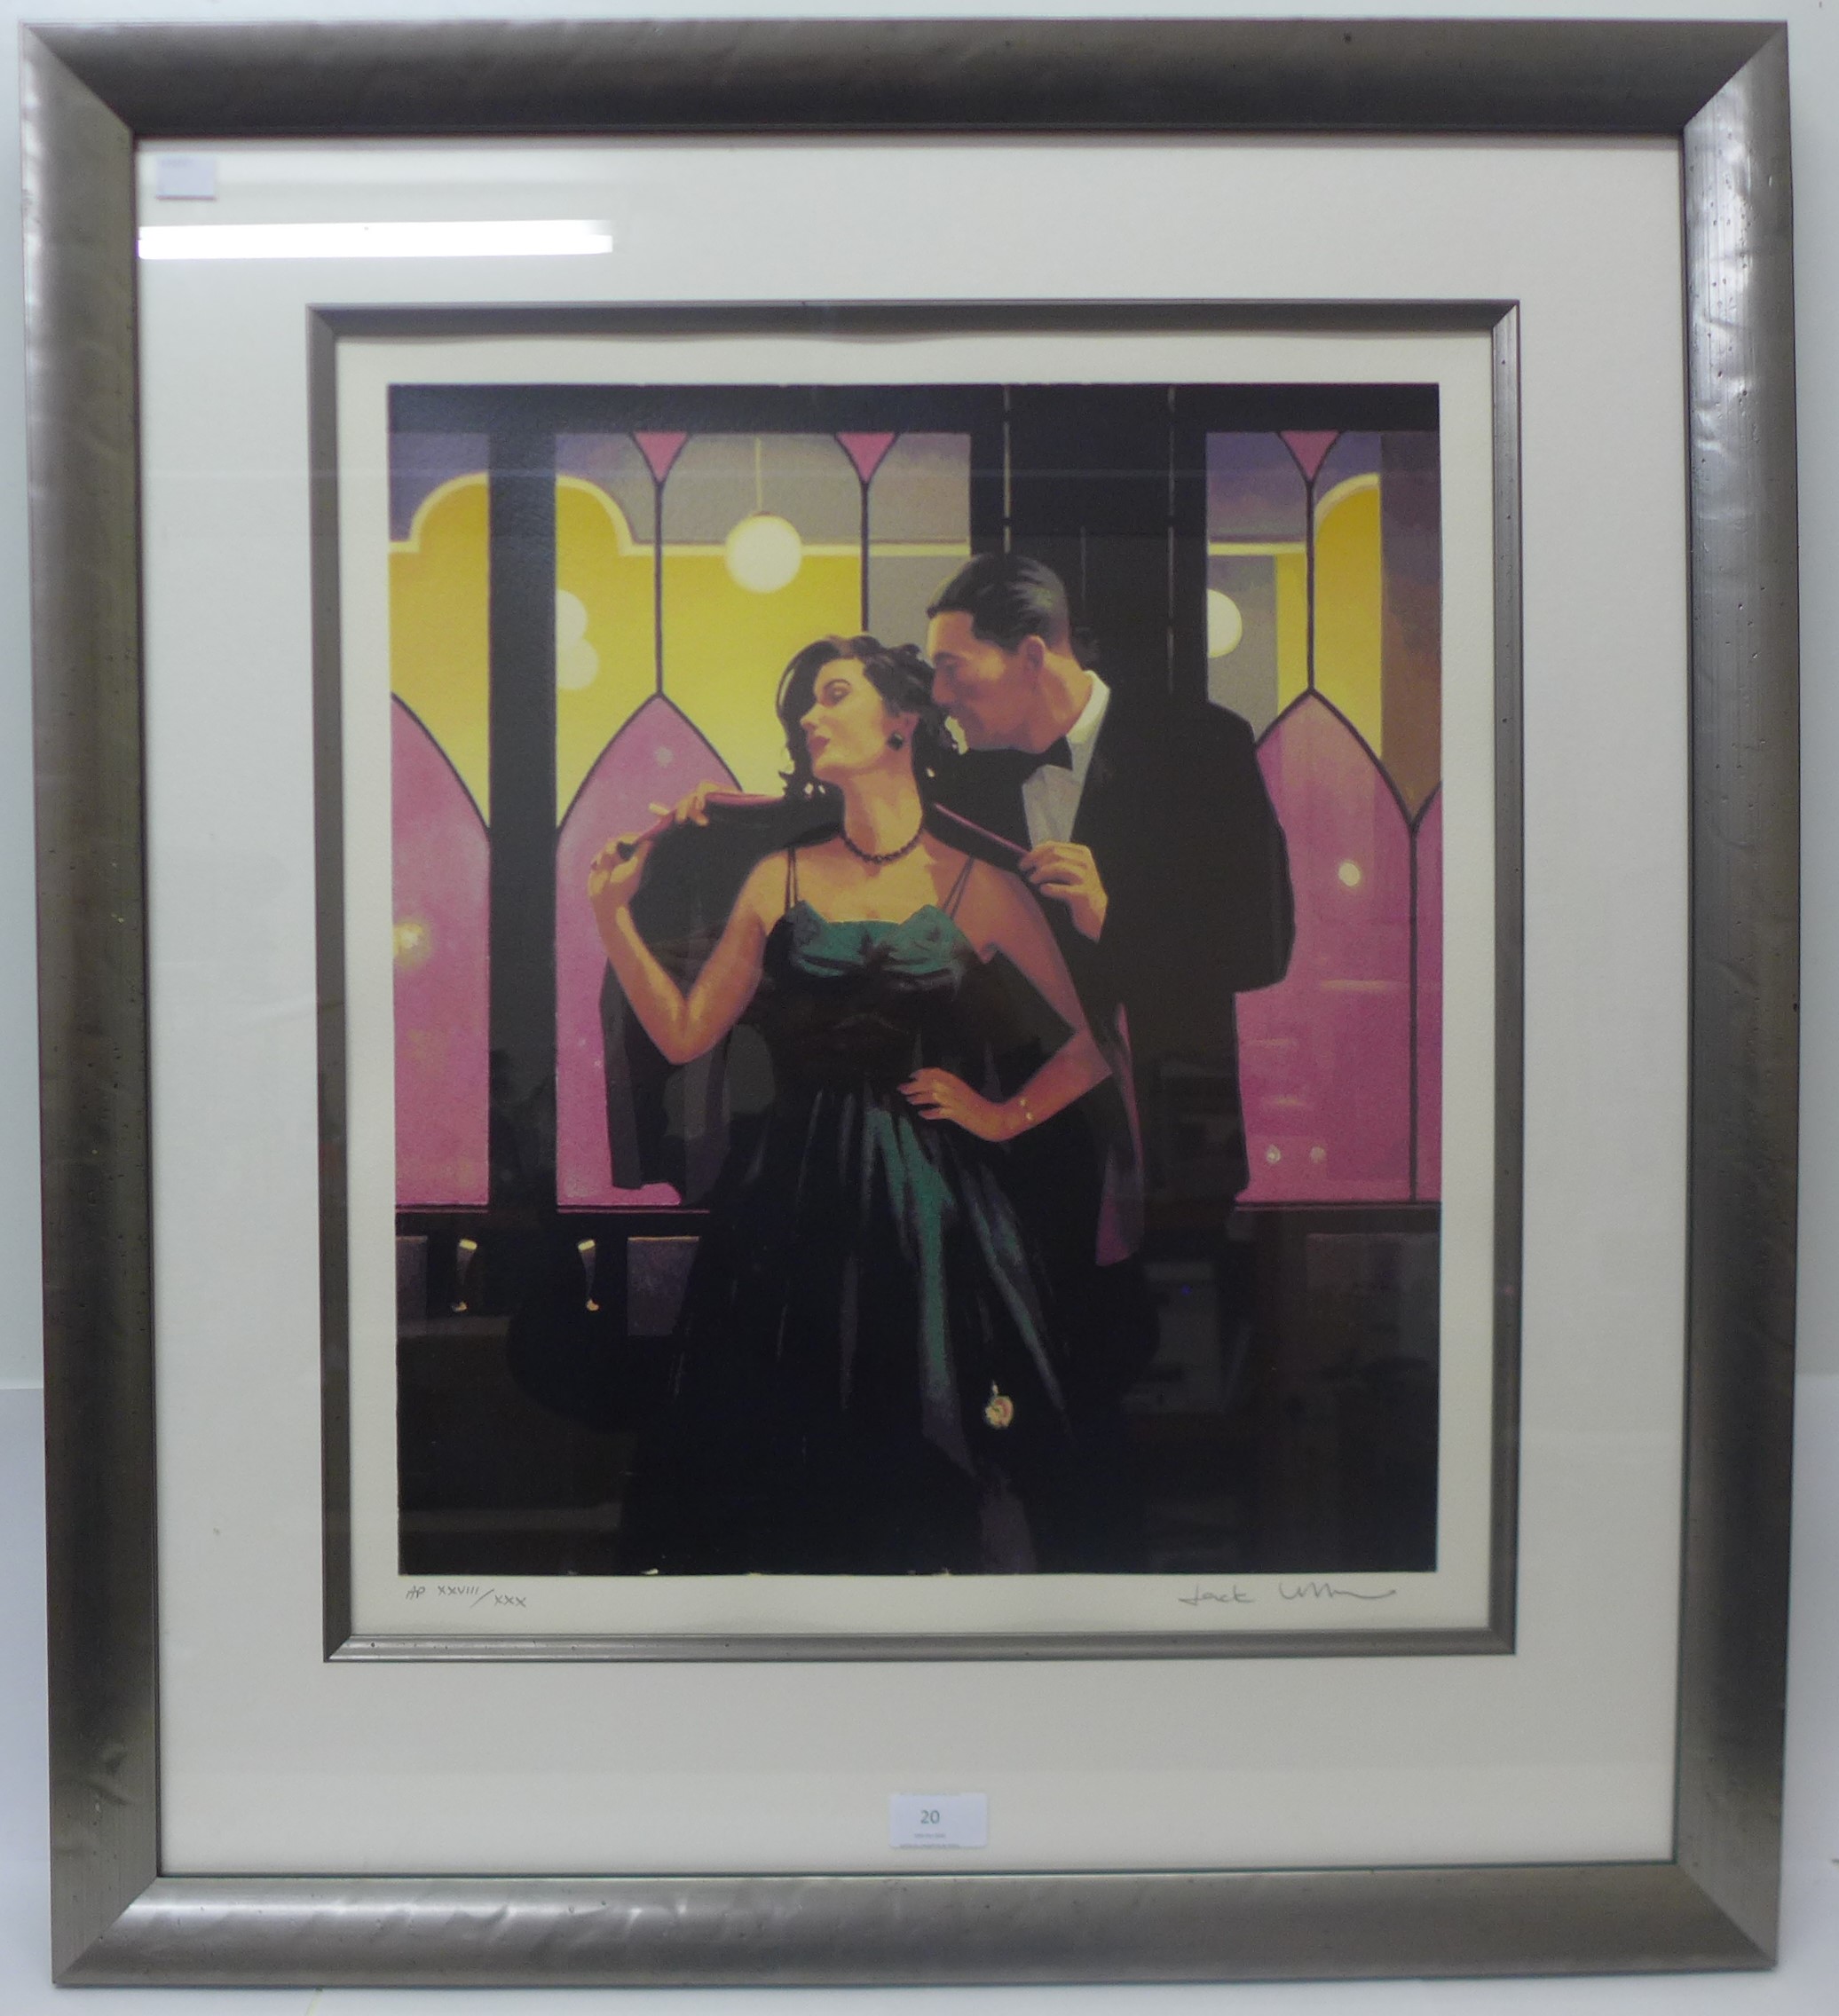 A signed Jack Vettriano limited edition artist proof print, 50 x 44cms, framed - Image 2 of 4